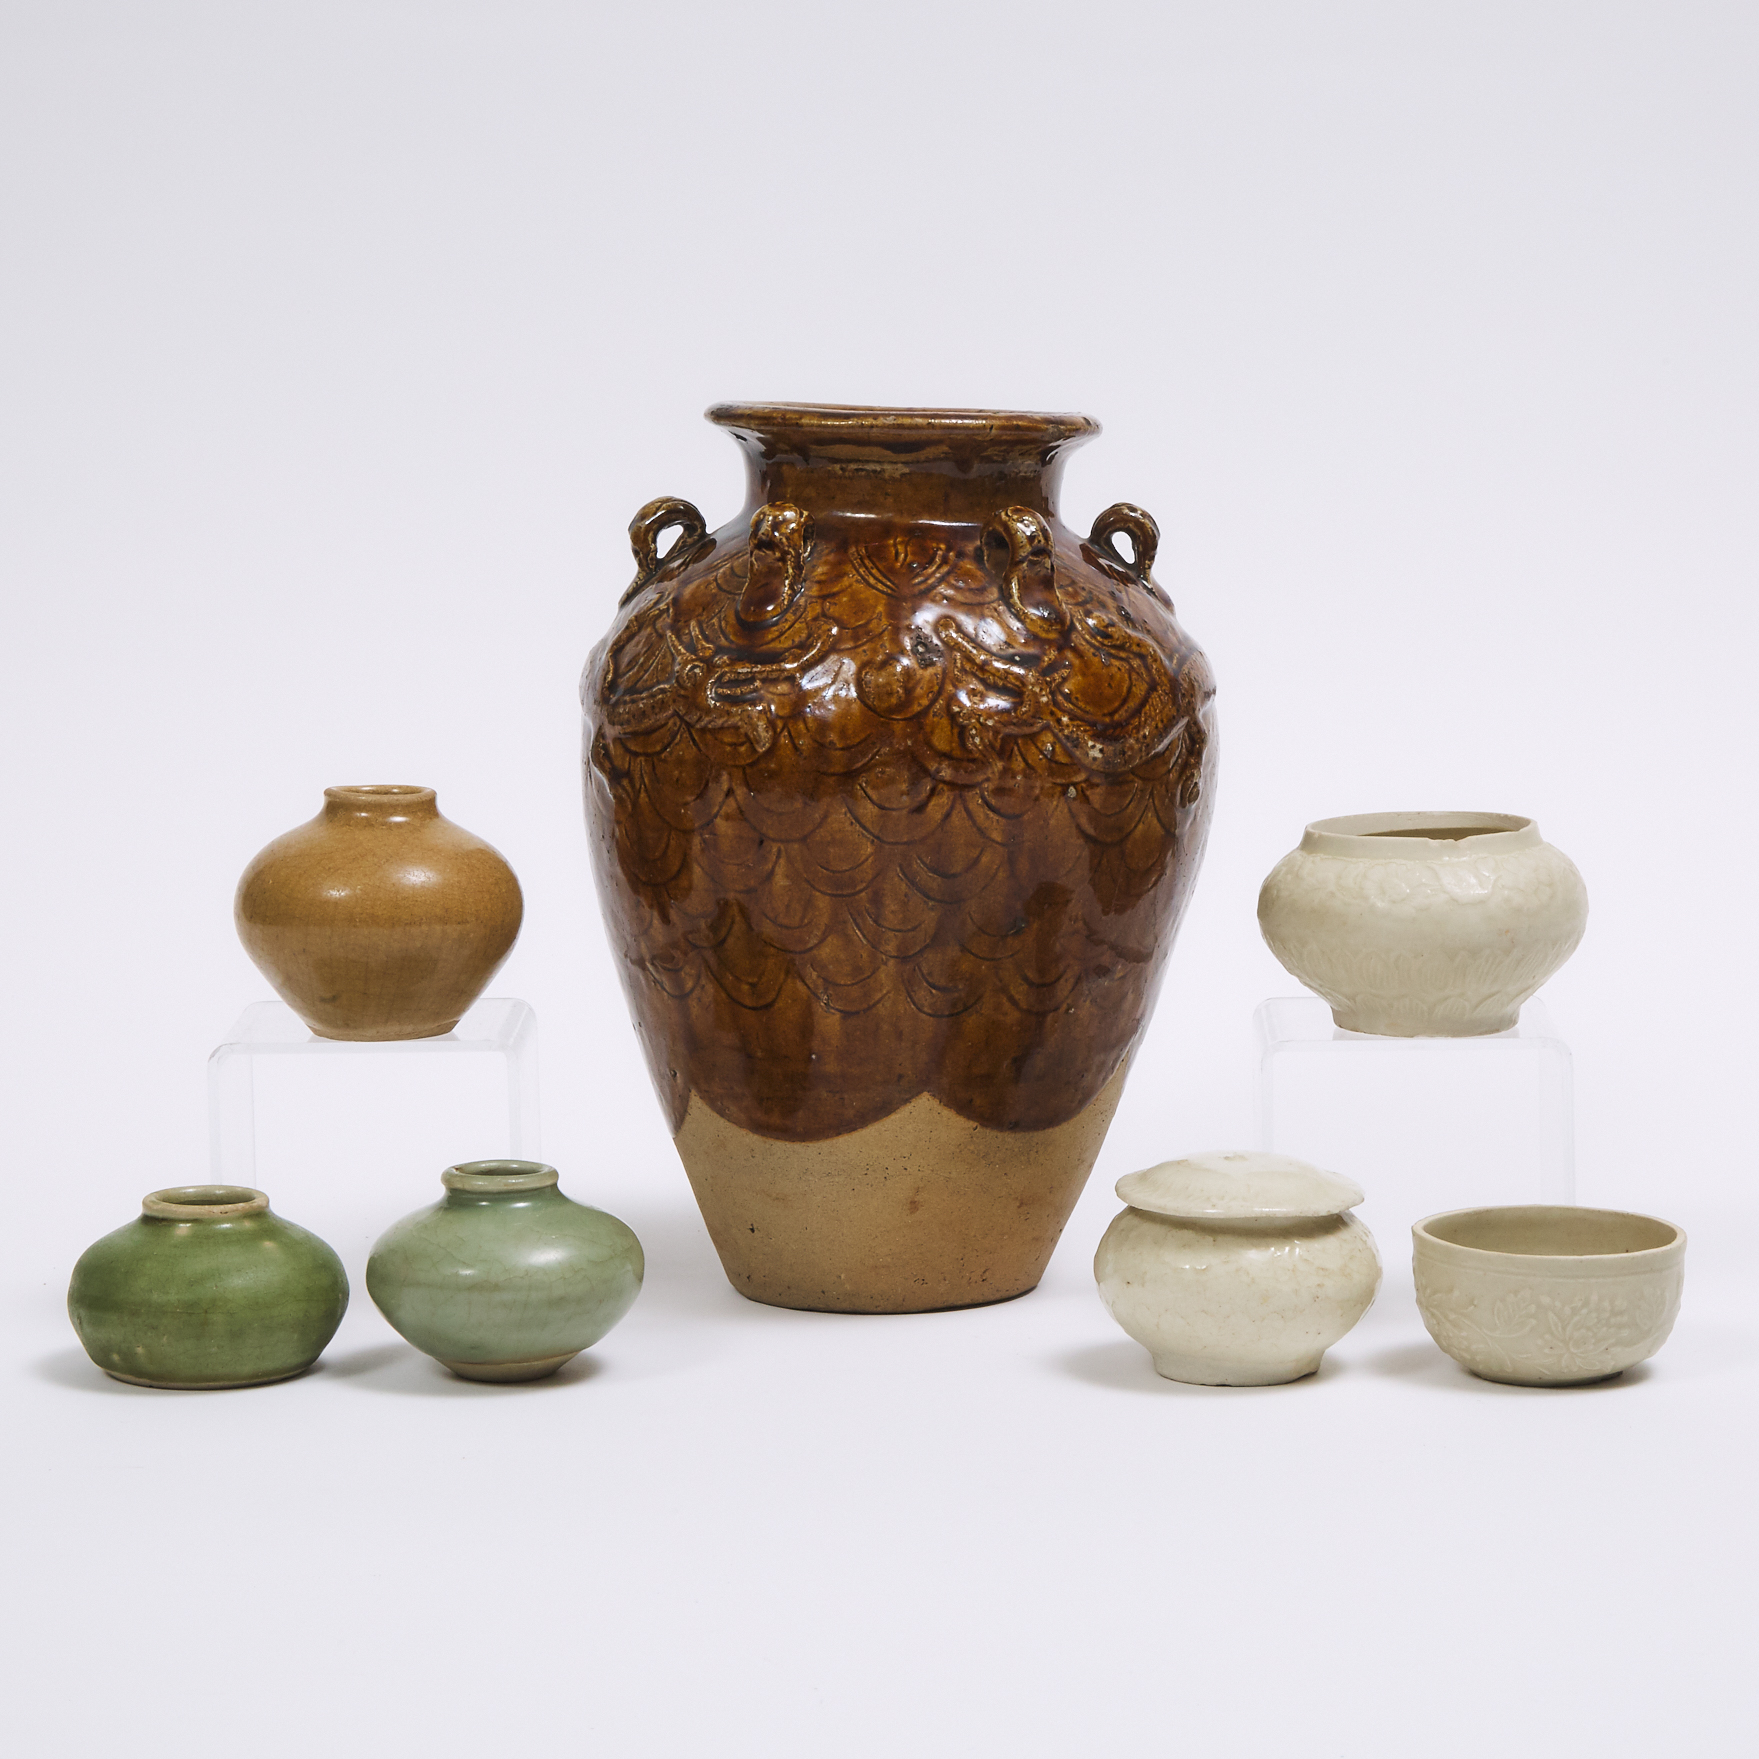 A Group of Seven Chinese Export Ceramic Wares, Late Ming/Early Qing Dynasty